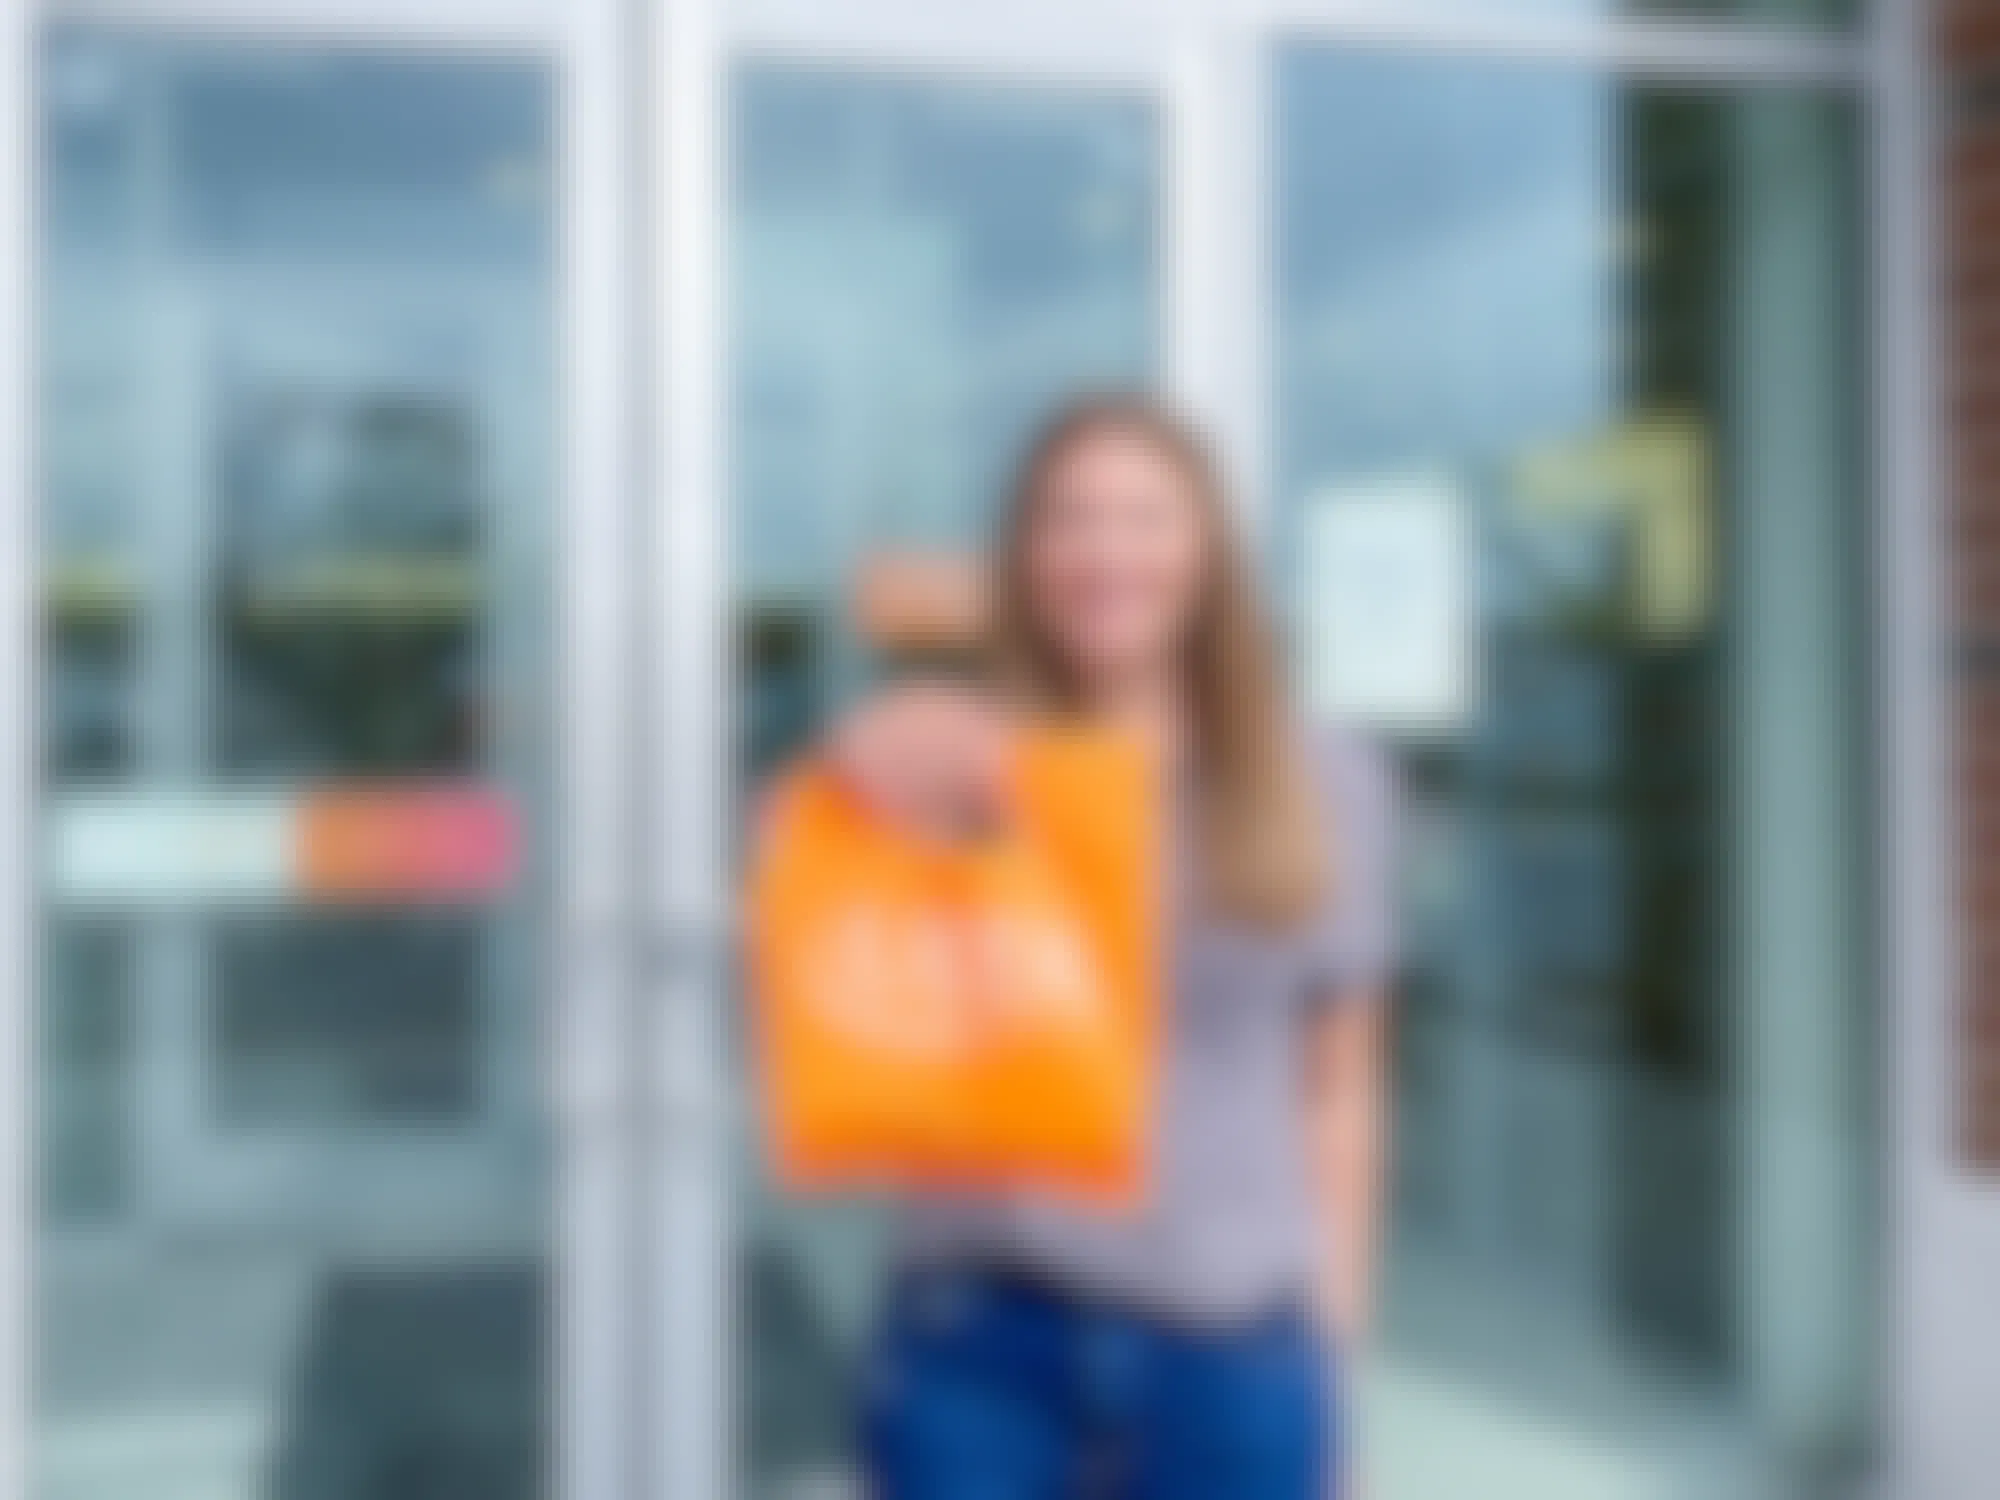 A person holding up a bag of items purchased from Ulta in front of an Ulta store